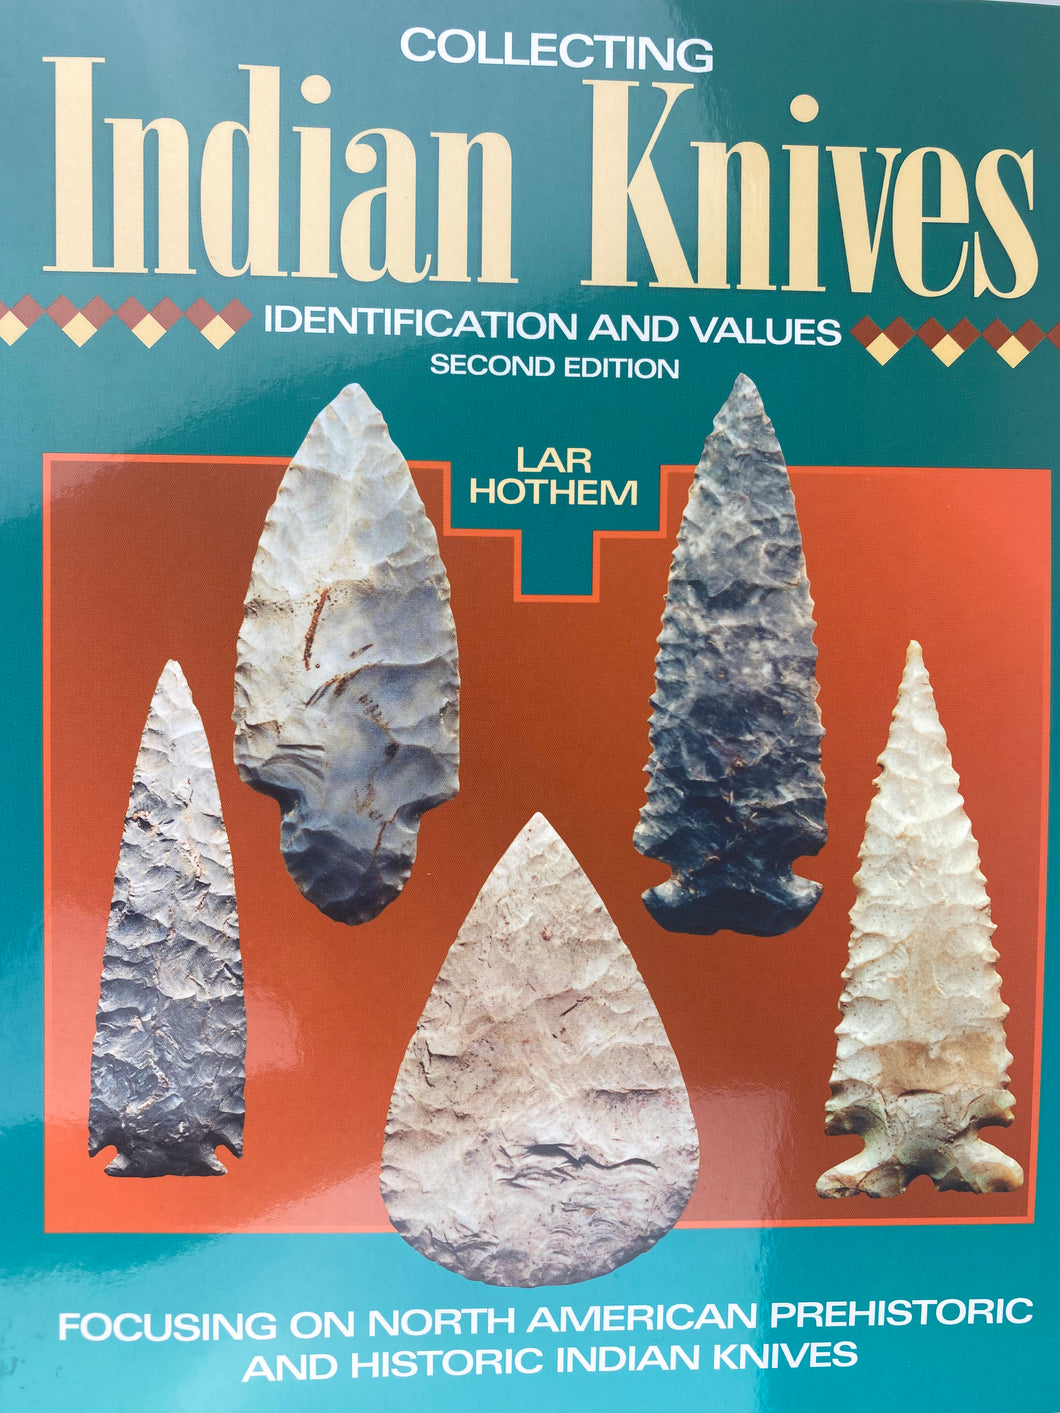 “Collecting Indian Knives” by Lar Hothem